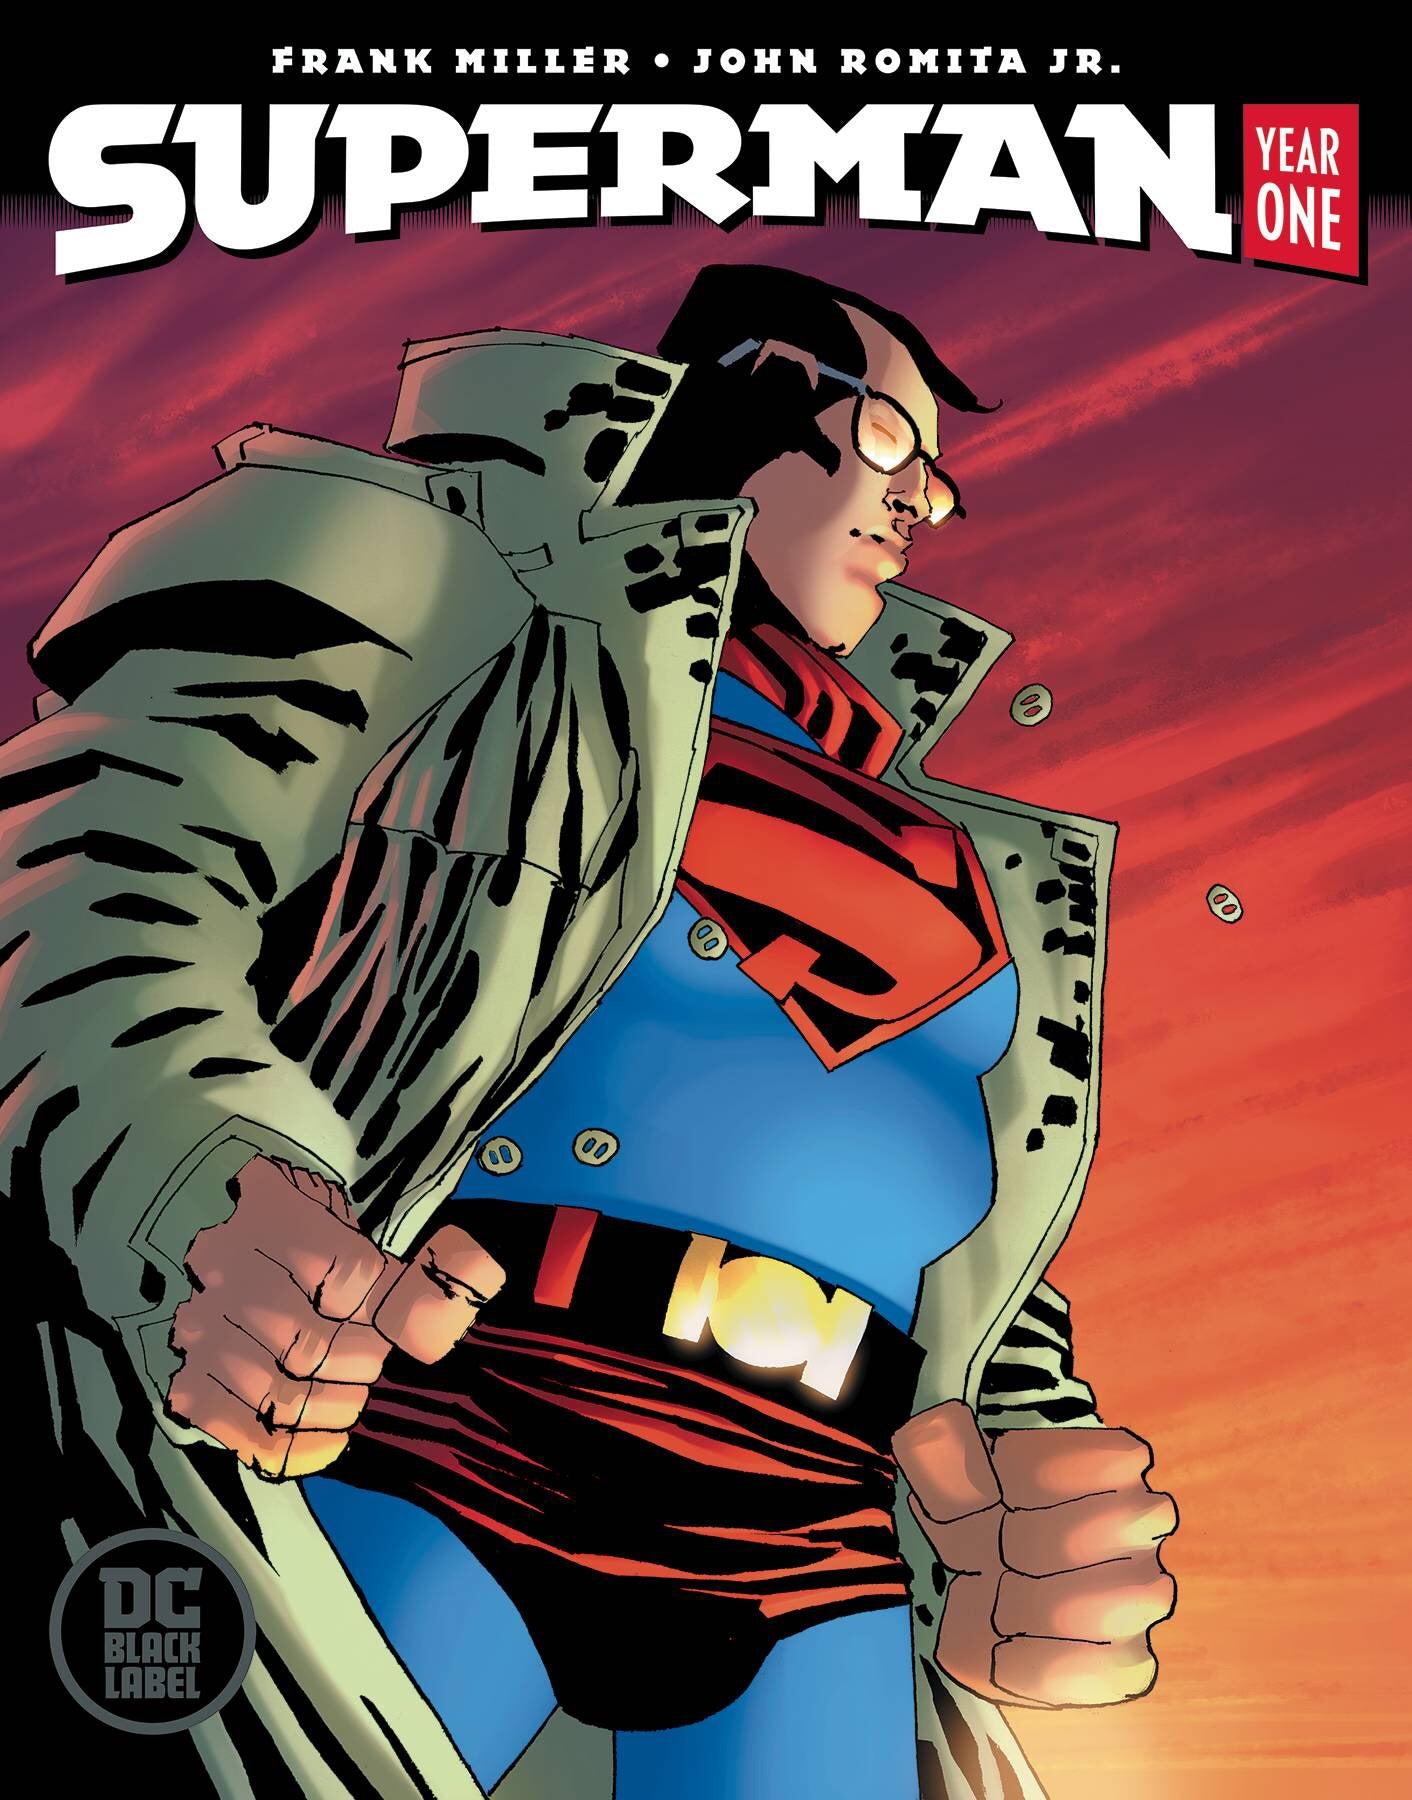 SUPERMAN YEAR ONE #2 (OF 3) MILLER COVER 08/14/19 FOC 07/22/19